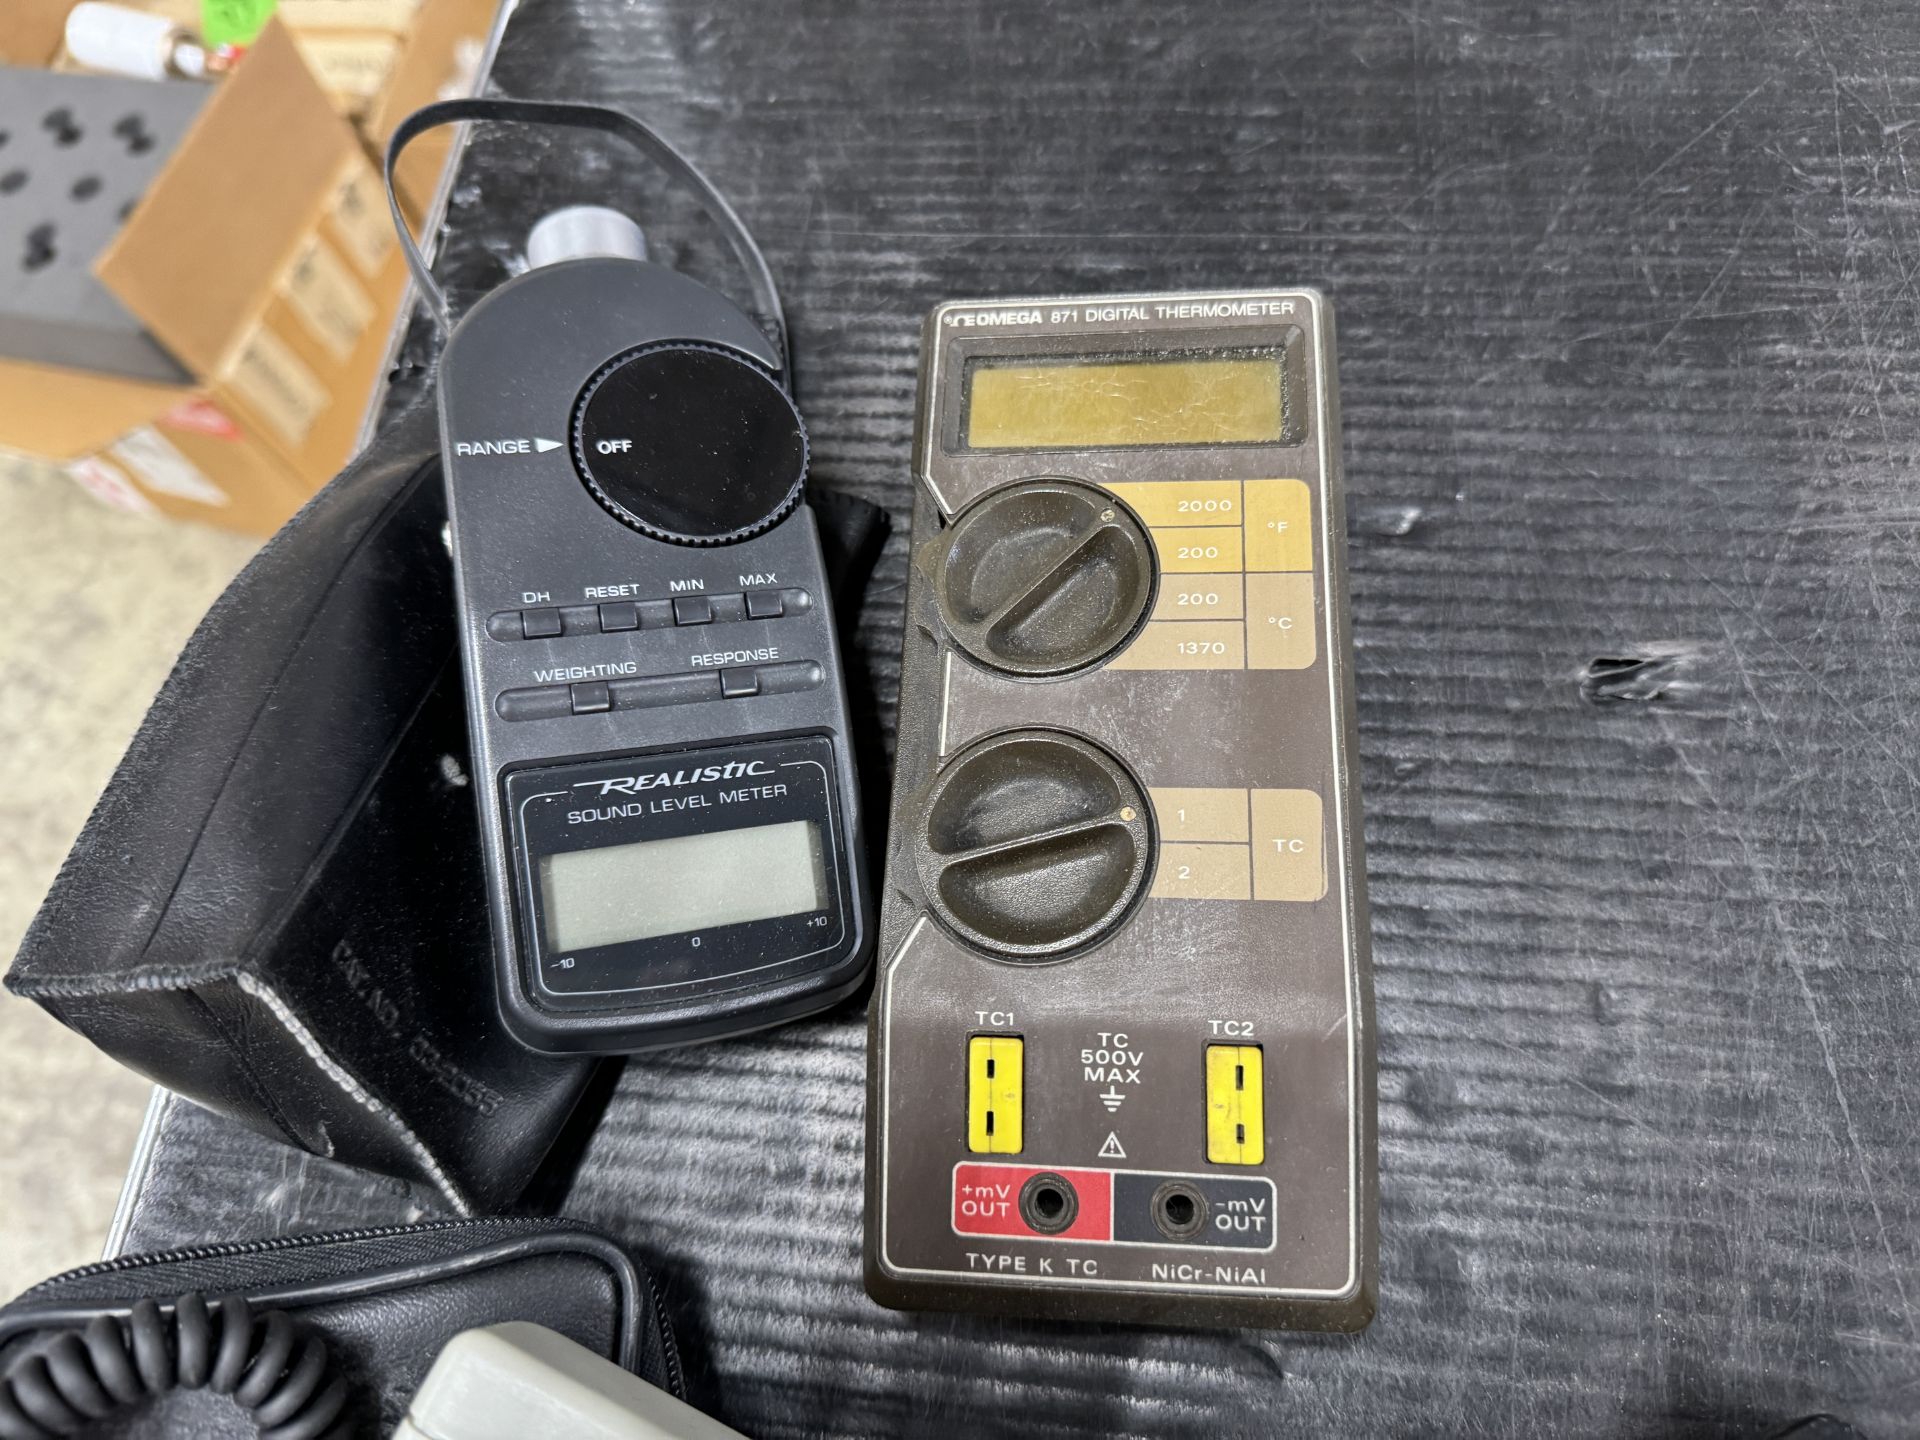 X-TECH LIGHT METER; OMEGA 871 DIGITAL THERMOMETER; REALISTIC SOUND LEVEL METER; A.W. SPERRY SLM- - Image 3 of 3